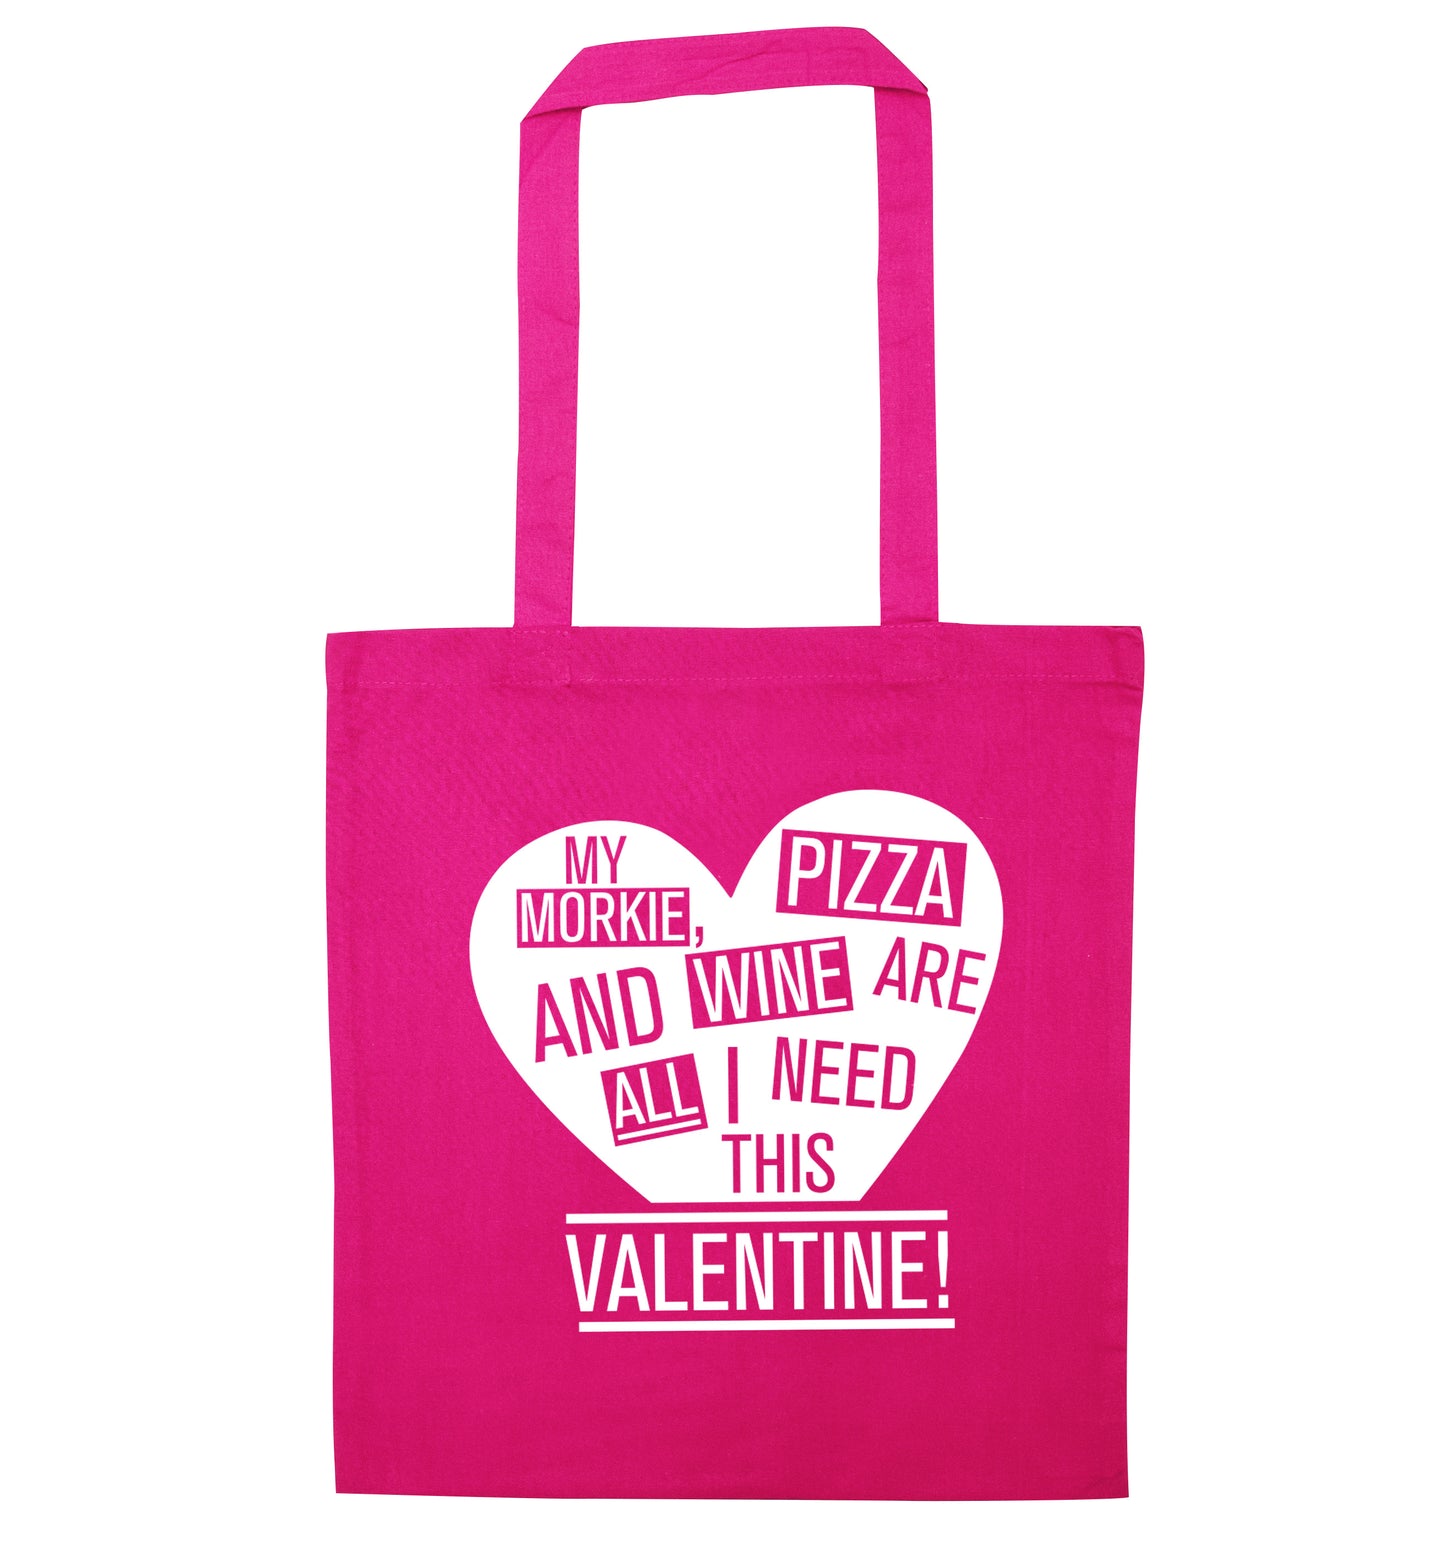 My morkie, pizza and wine are all I need this valentine! pink tote bag